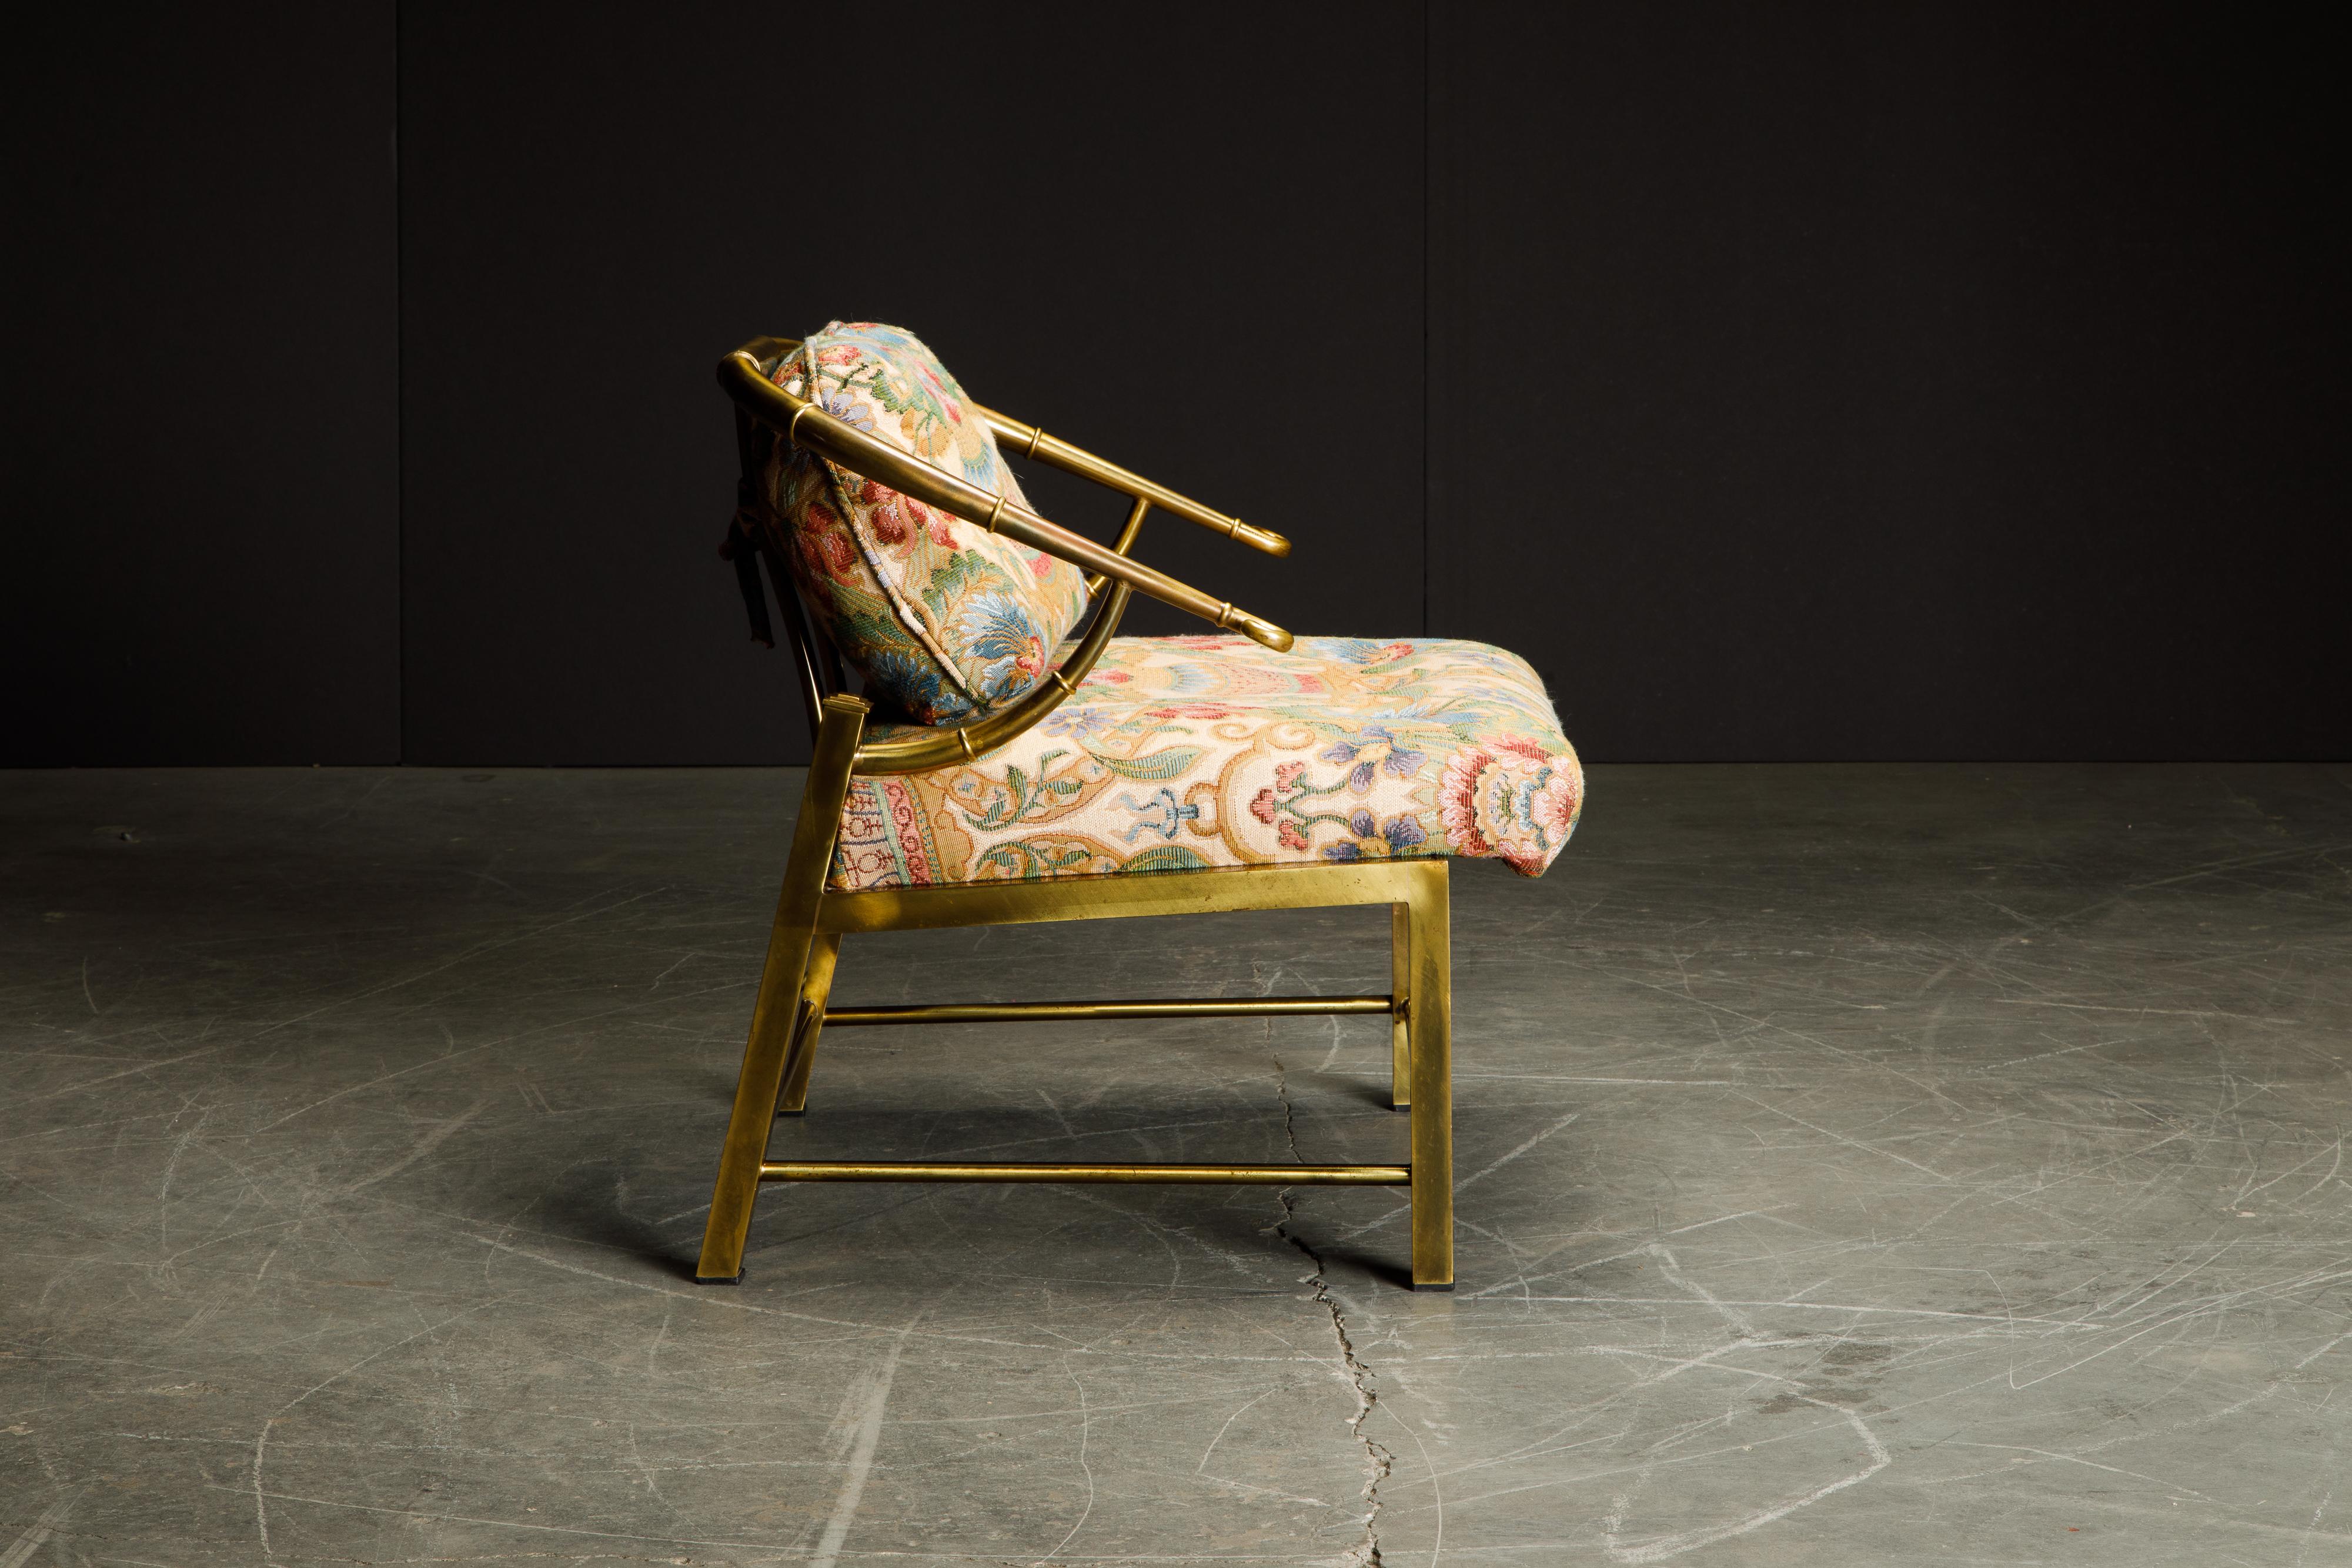 Italian Brass Lounge Chair by Charles Pengally for Mastercraft, c. 1970 Italy